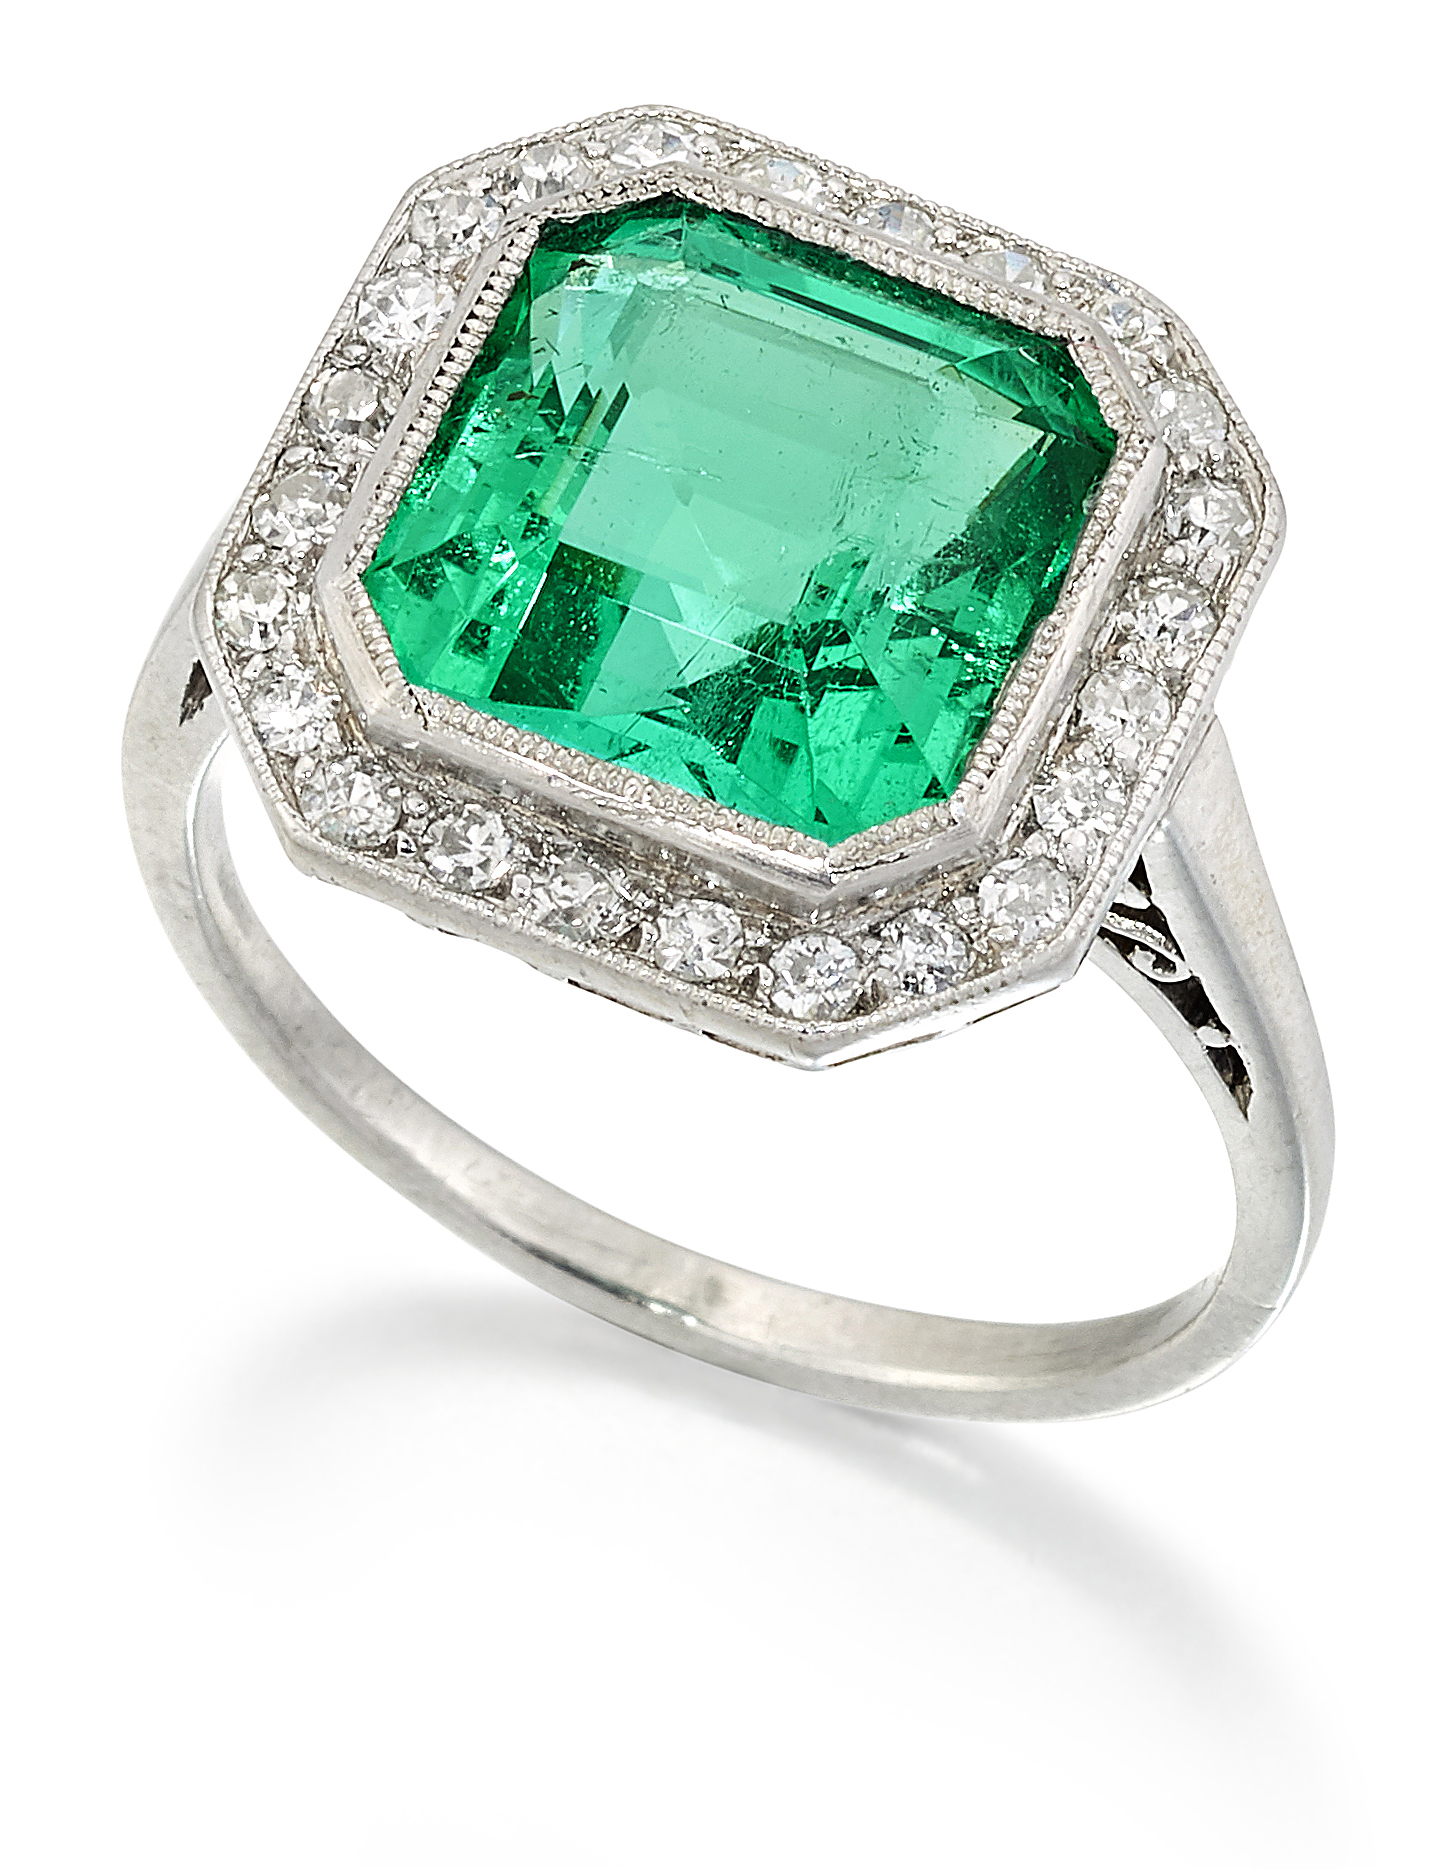 AN ART DECO COLOMBIAN EMERALD AND DIAMOND CLUSTER RING